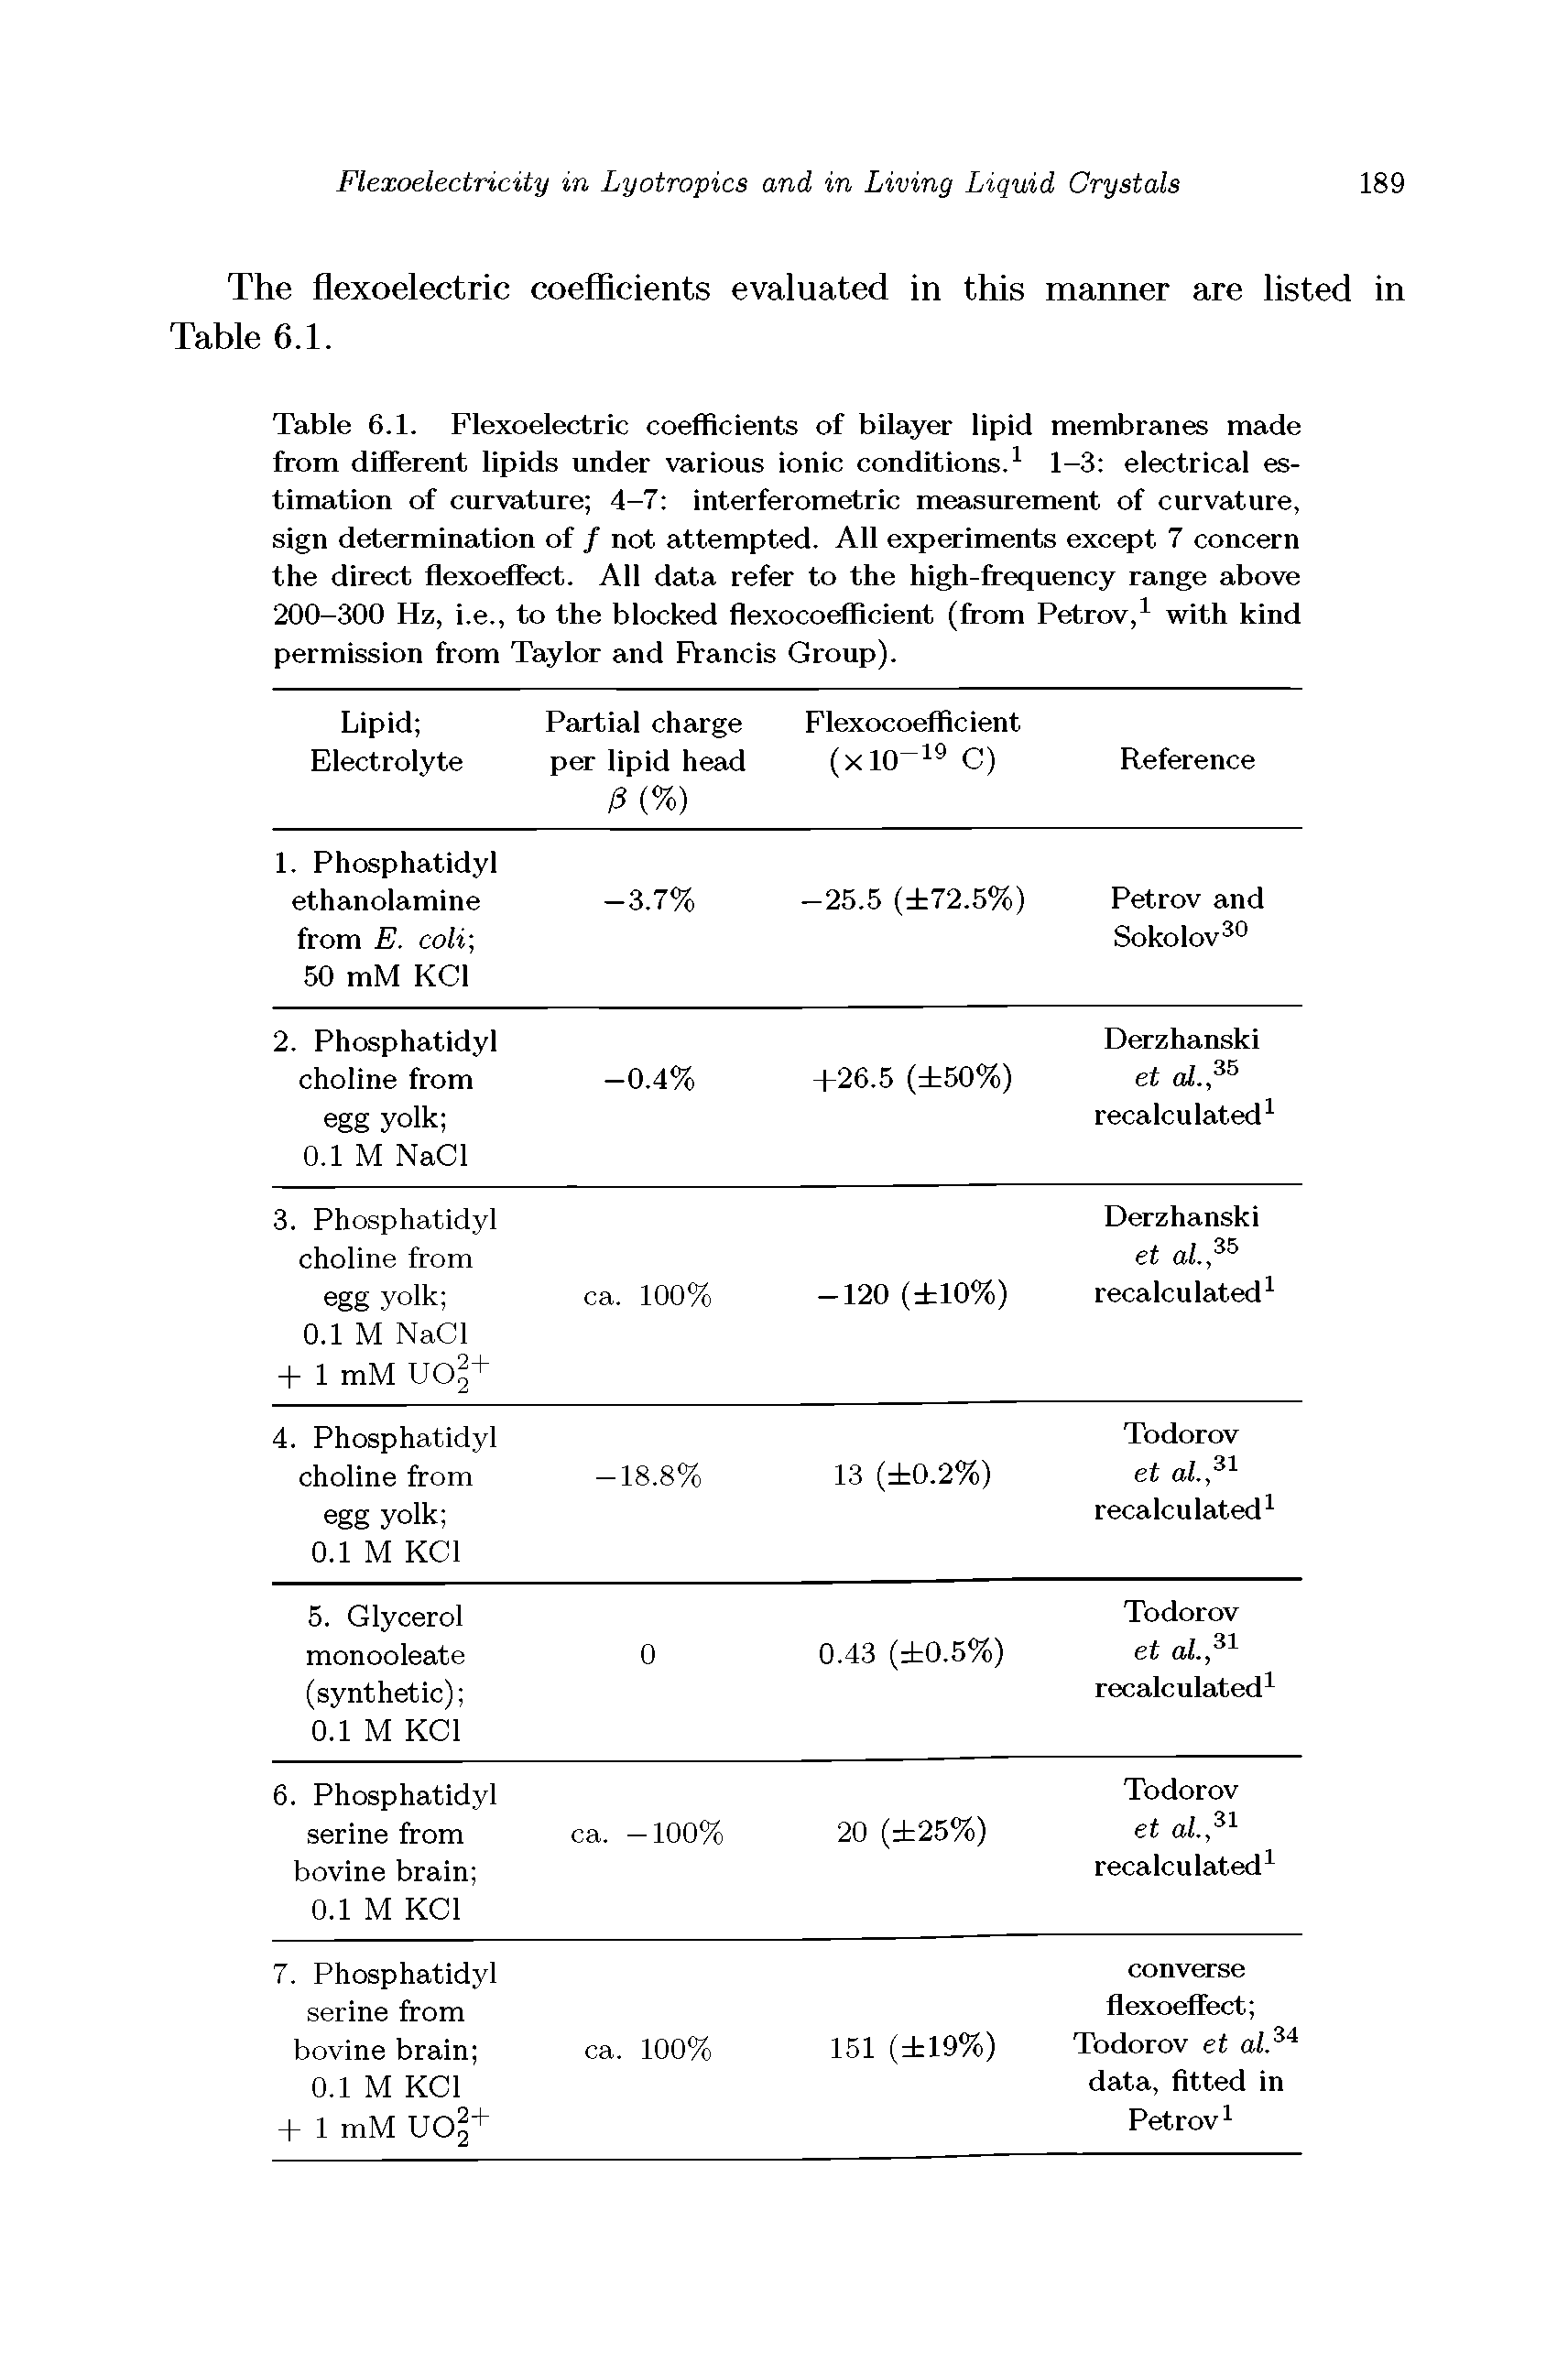 Table 6.1. Flexoelectric coefficients of bilayer lipid membranes made from different lipids under various ionic conditions. 1-3 electrical estimation of curvature 4-7 interferometric mesisurement of curvature, sign determination of / not attempted. All experiments except 7 concern the direct fiexoeffect. All data refer to the high-frequency range above 200-300 Hz, i.e., to the blocked flexocoefficient (from Petrov, with kind permission from Taylor and FVancis Group).